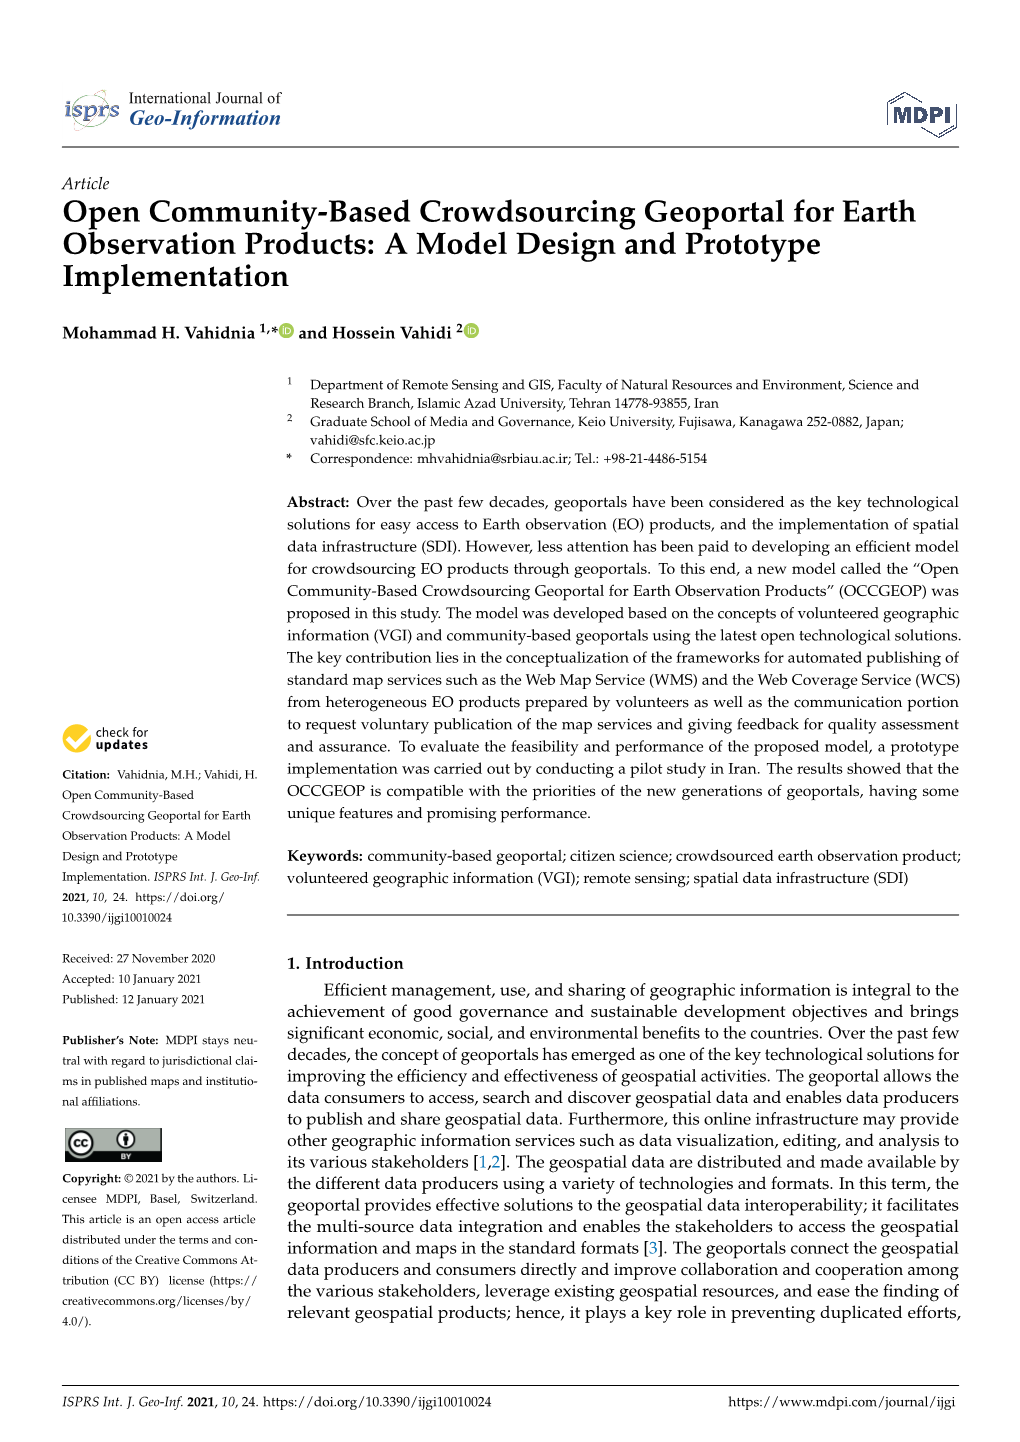 Open Community-Based Crowdsourcing Geoportal for Earth Observation Products: a Model Design and Prototype Implementation